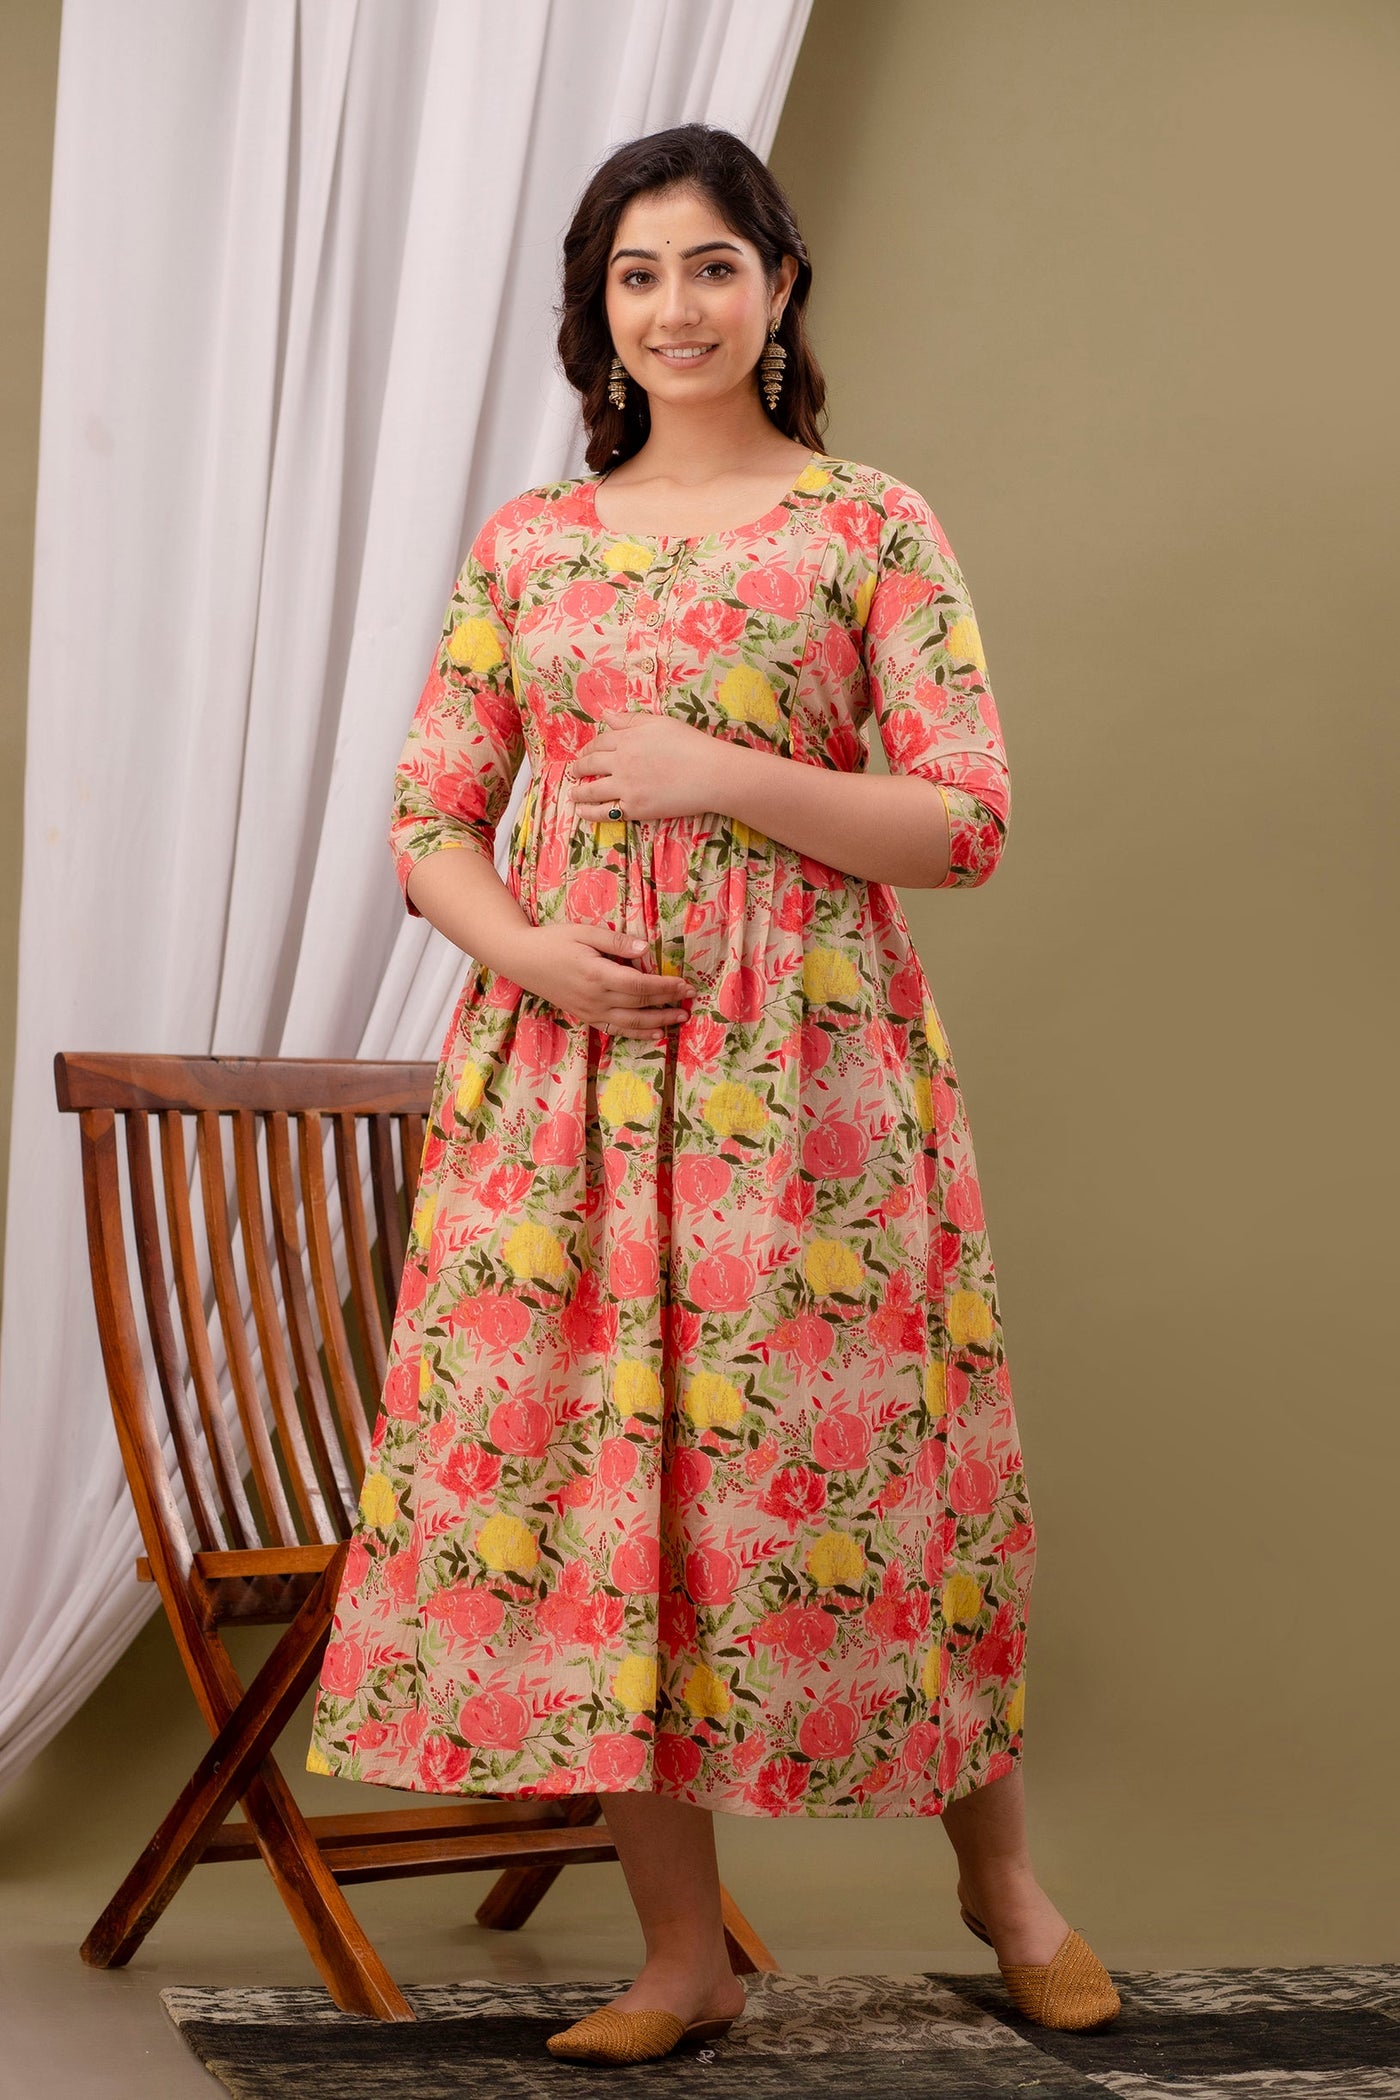 Pinkish Floral Feeding Maternity Gown: Skin Color, Dual Side Zips